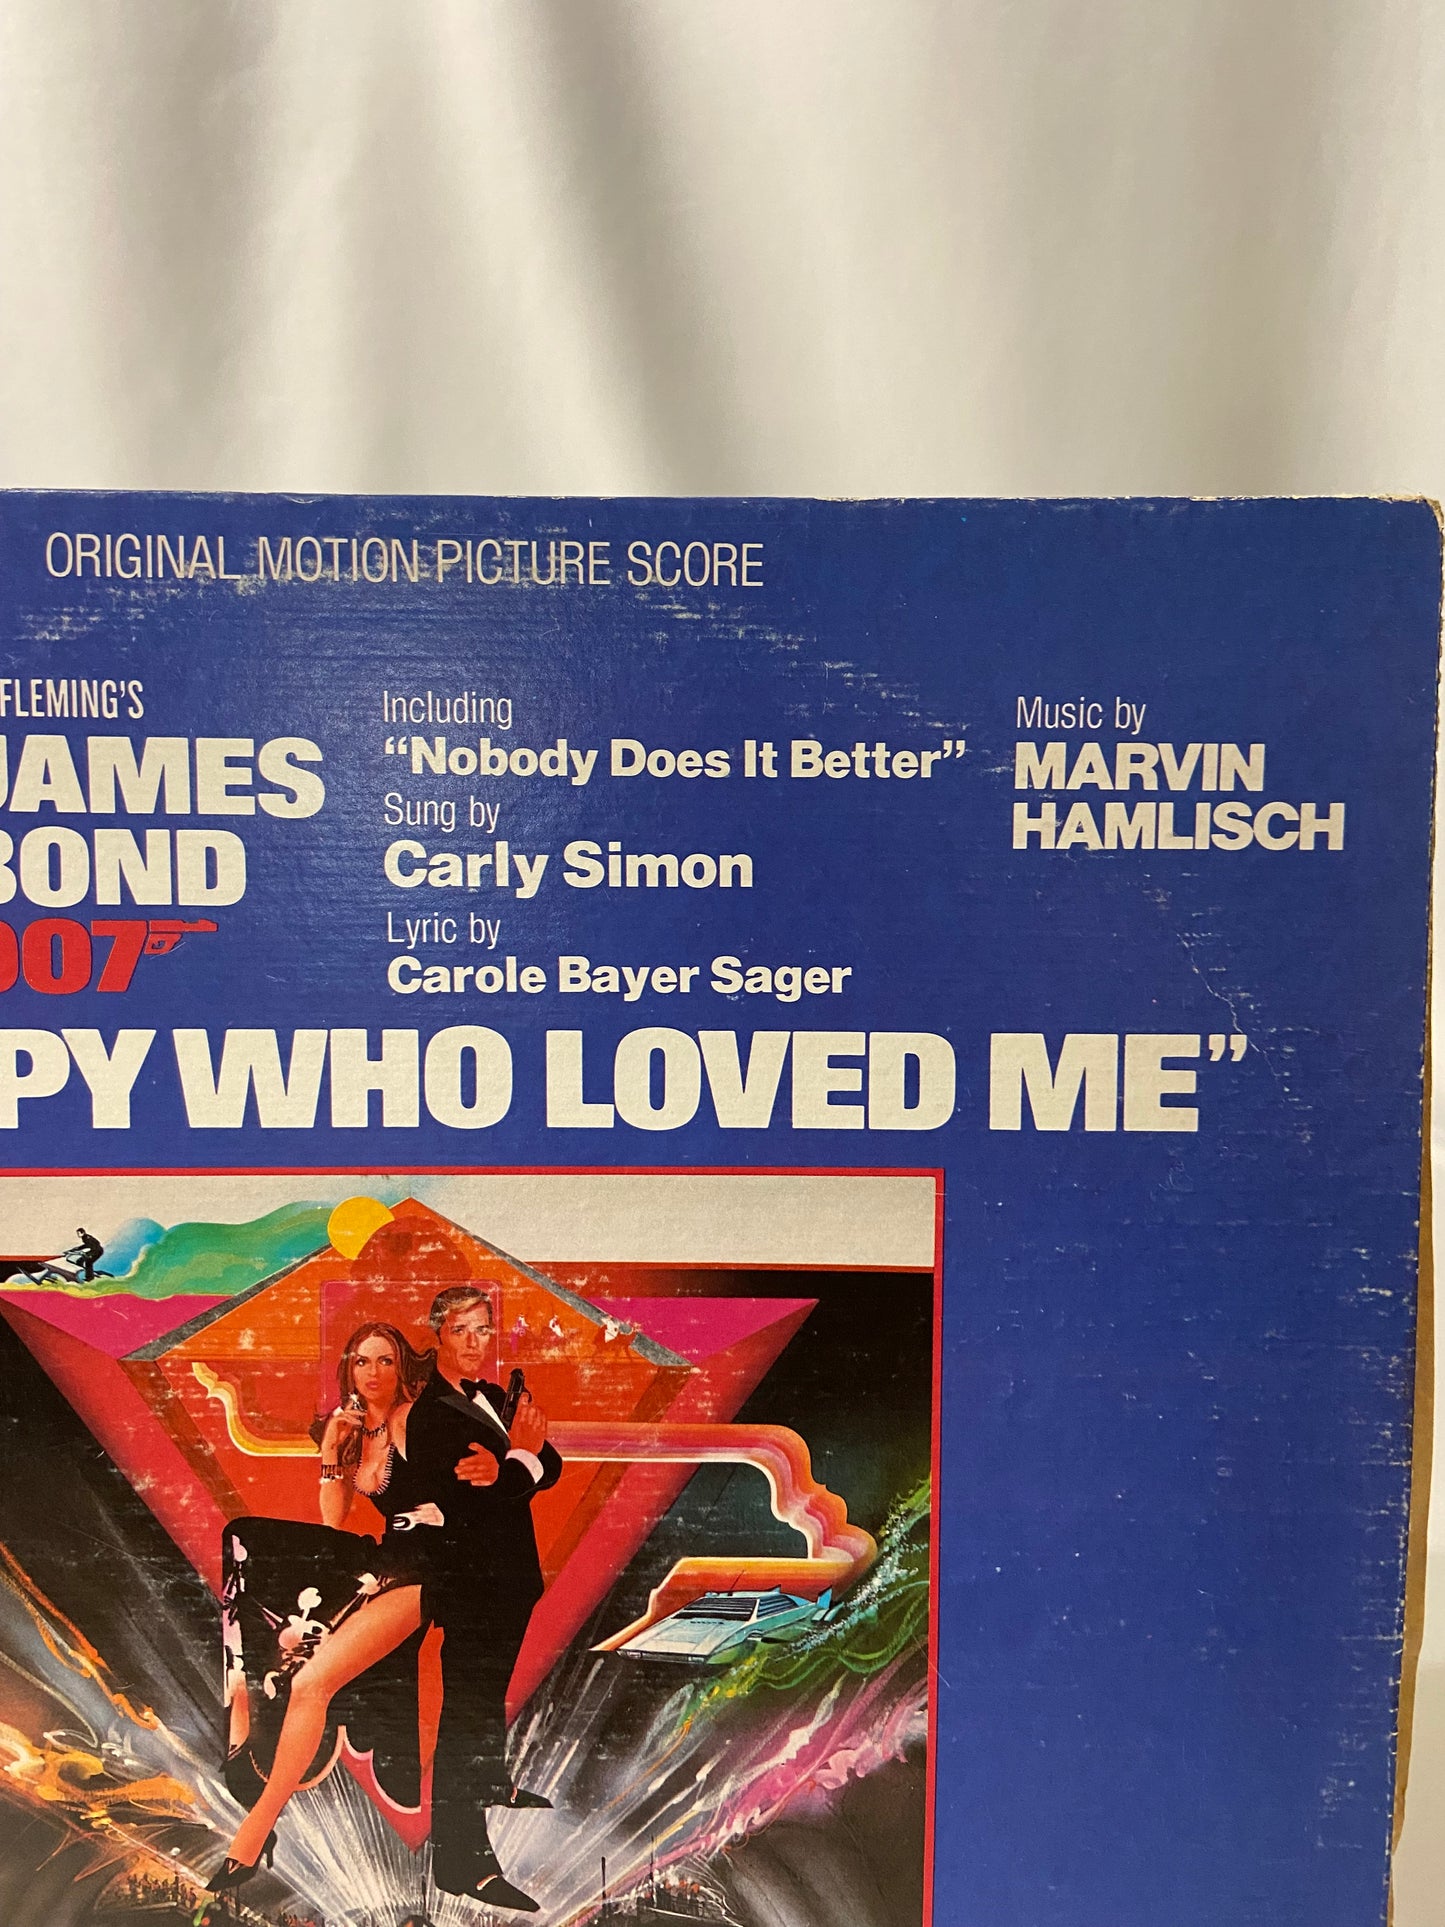 United Artists The Spy Who Loved Me Album